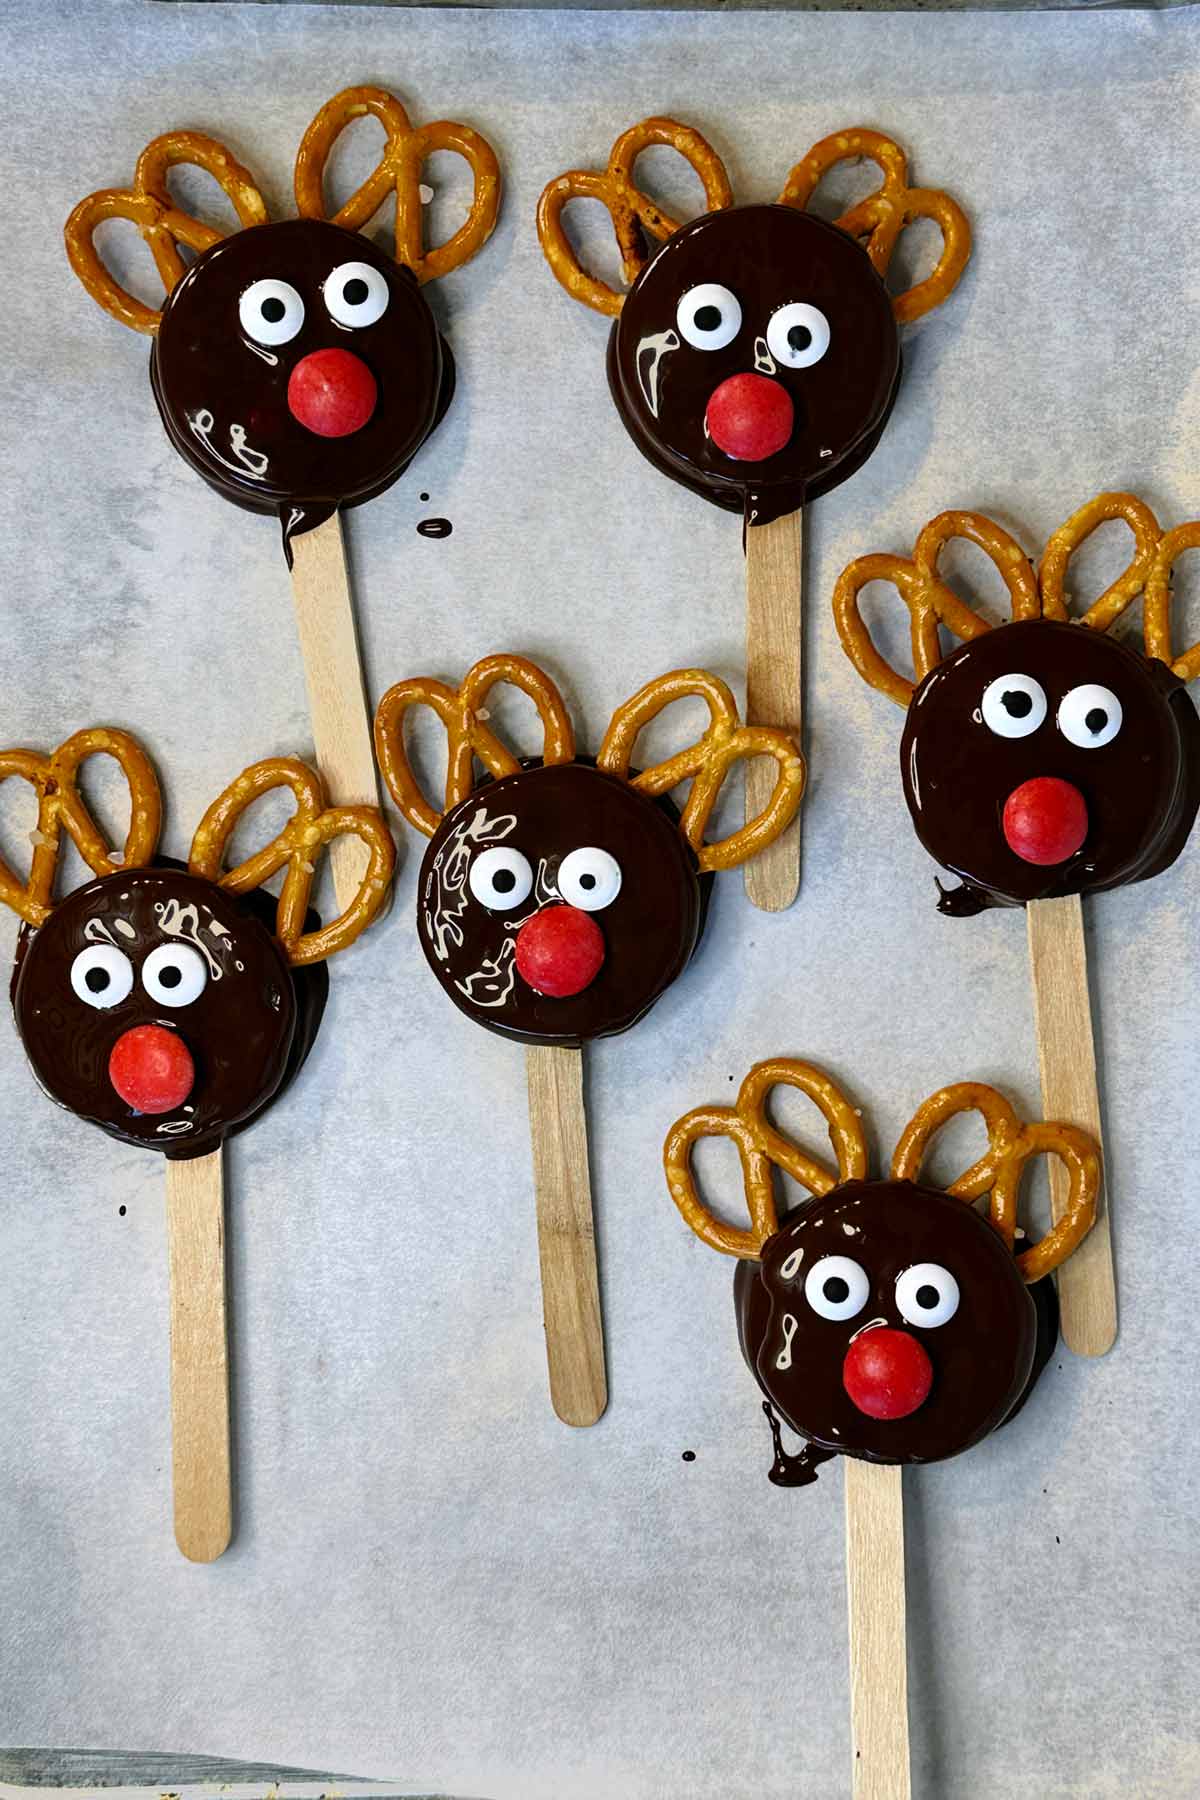 Six coated Oreos on a lined baking tray, decorated like reindeers.